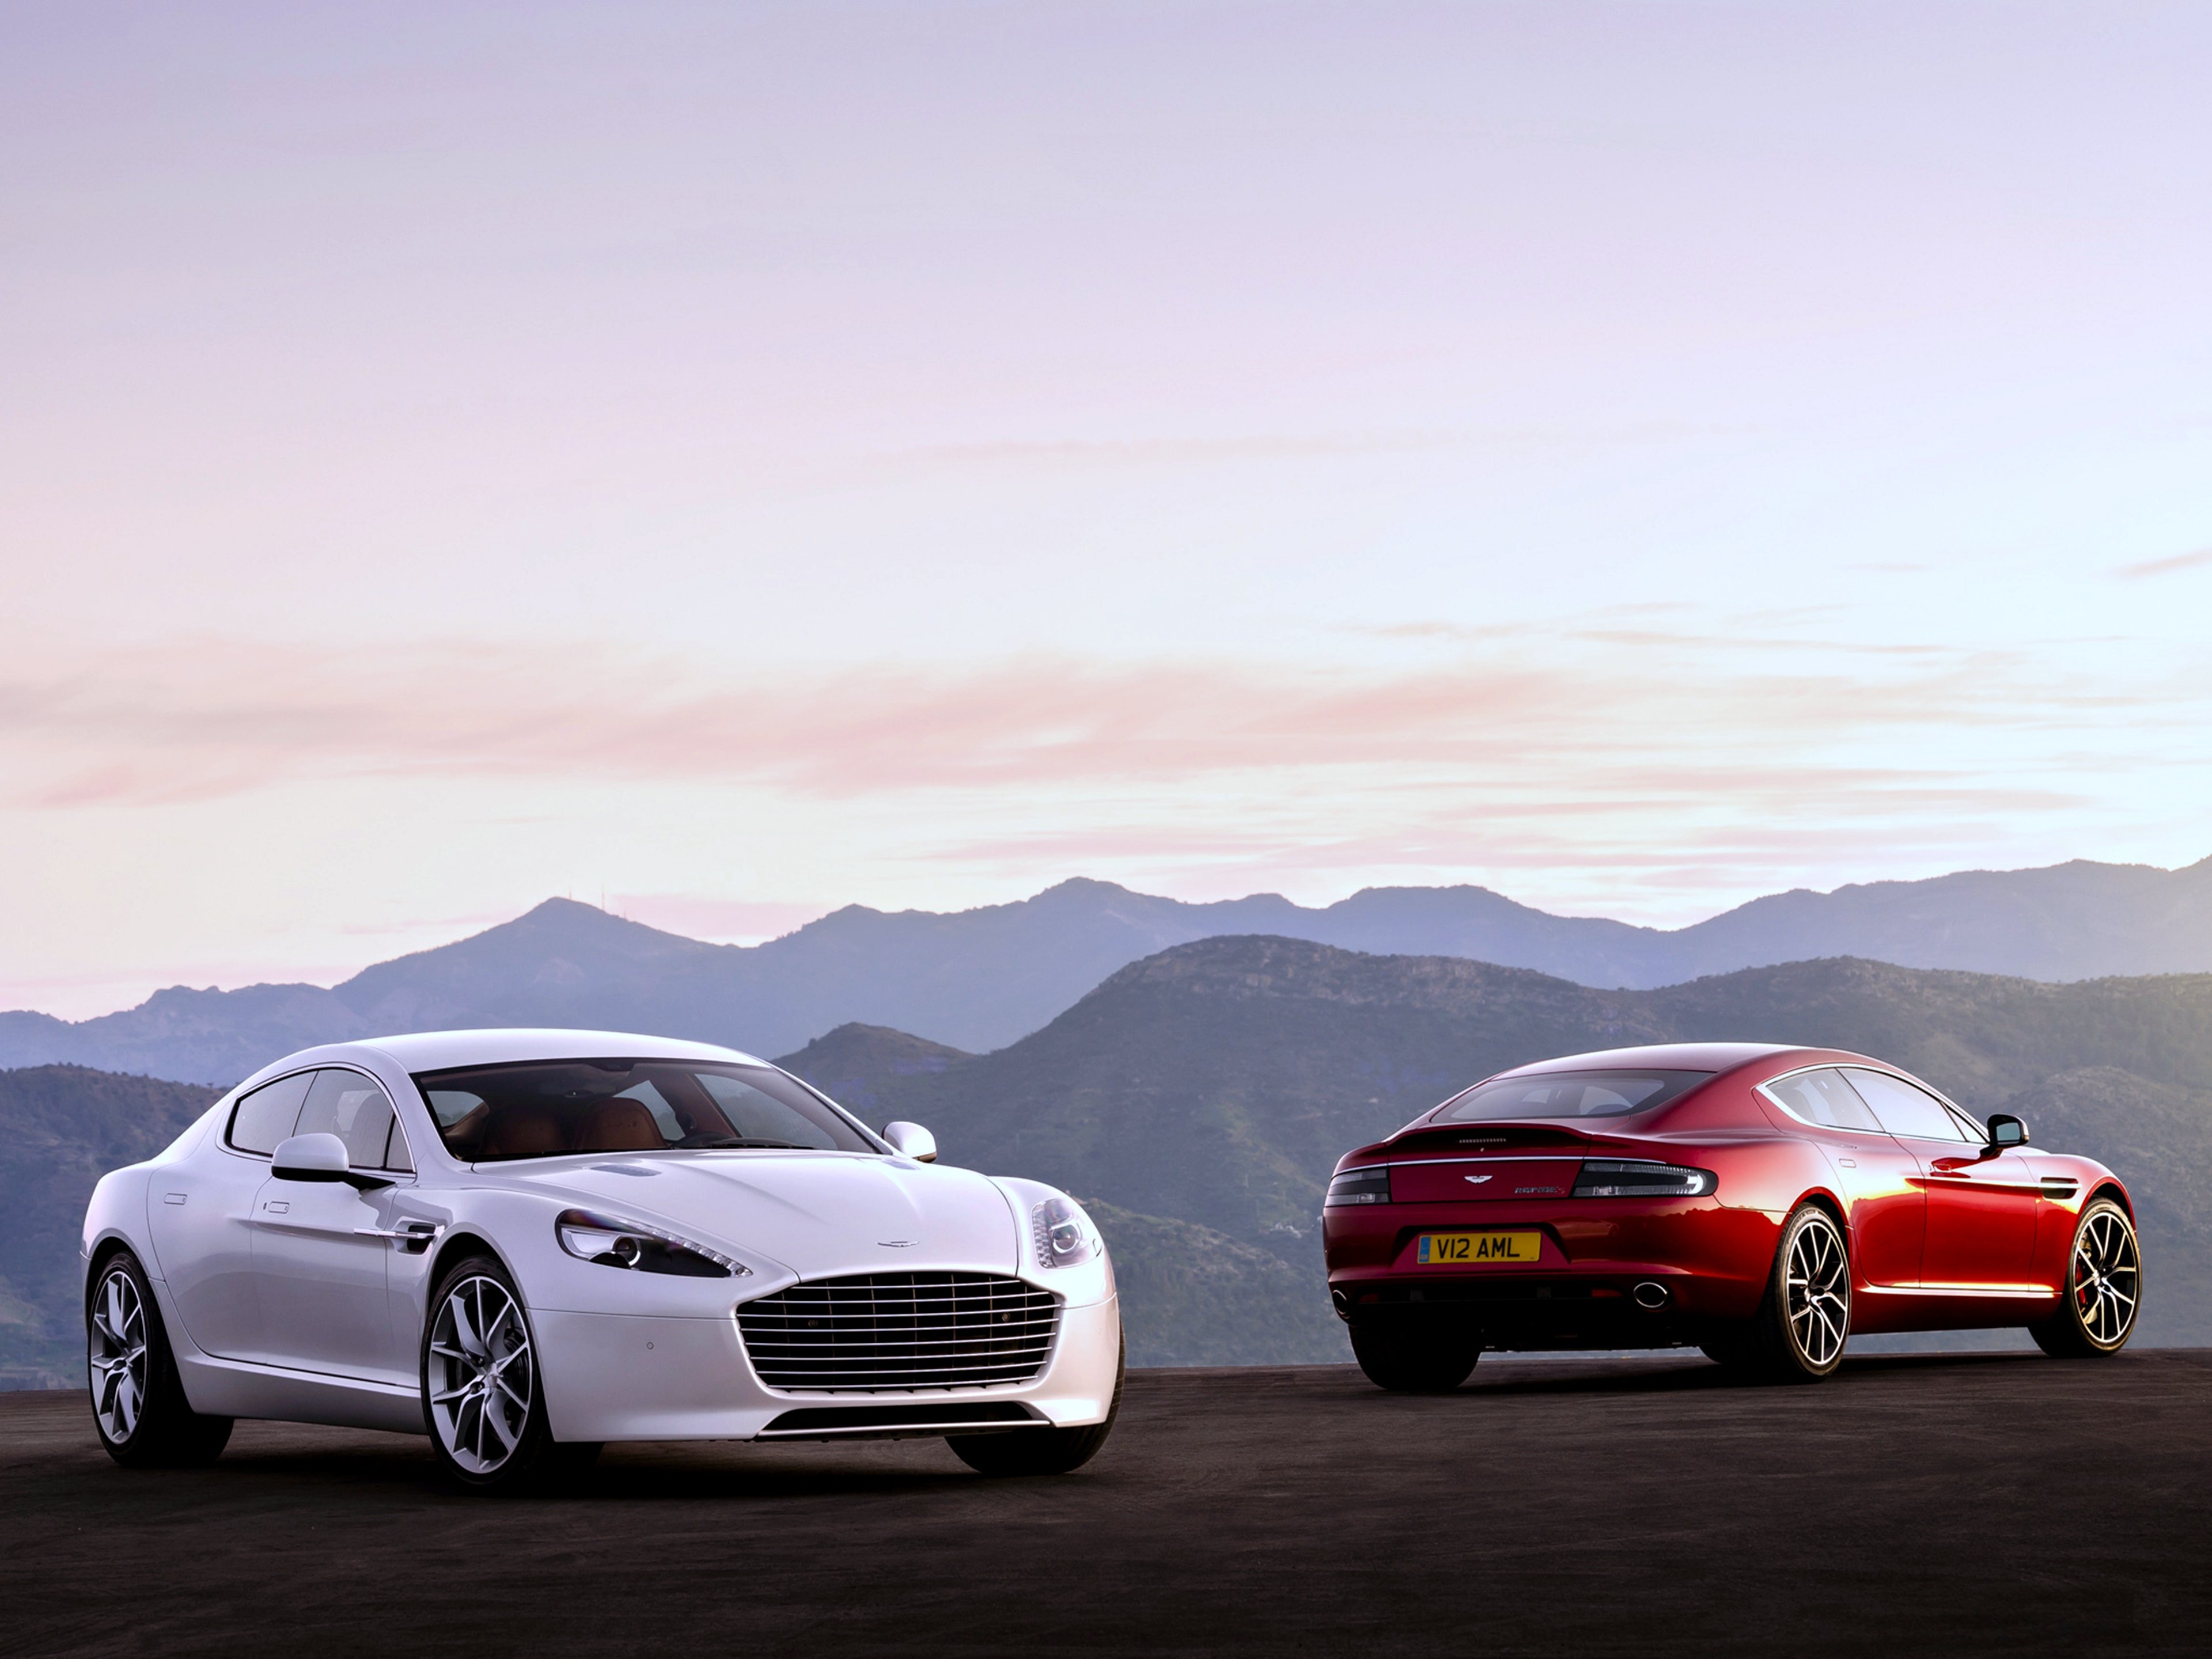 aston, Martin, Rapide s, Red, White, Landscaps, Cars, Speed, Motors, Mountains, Supper Wallpaper